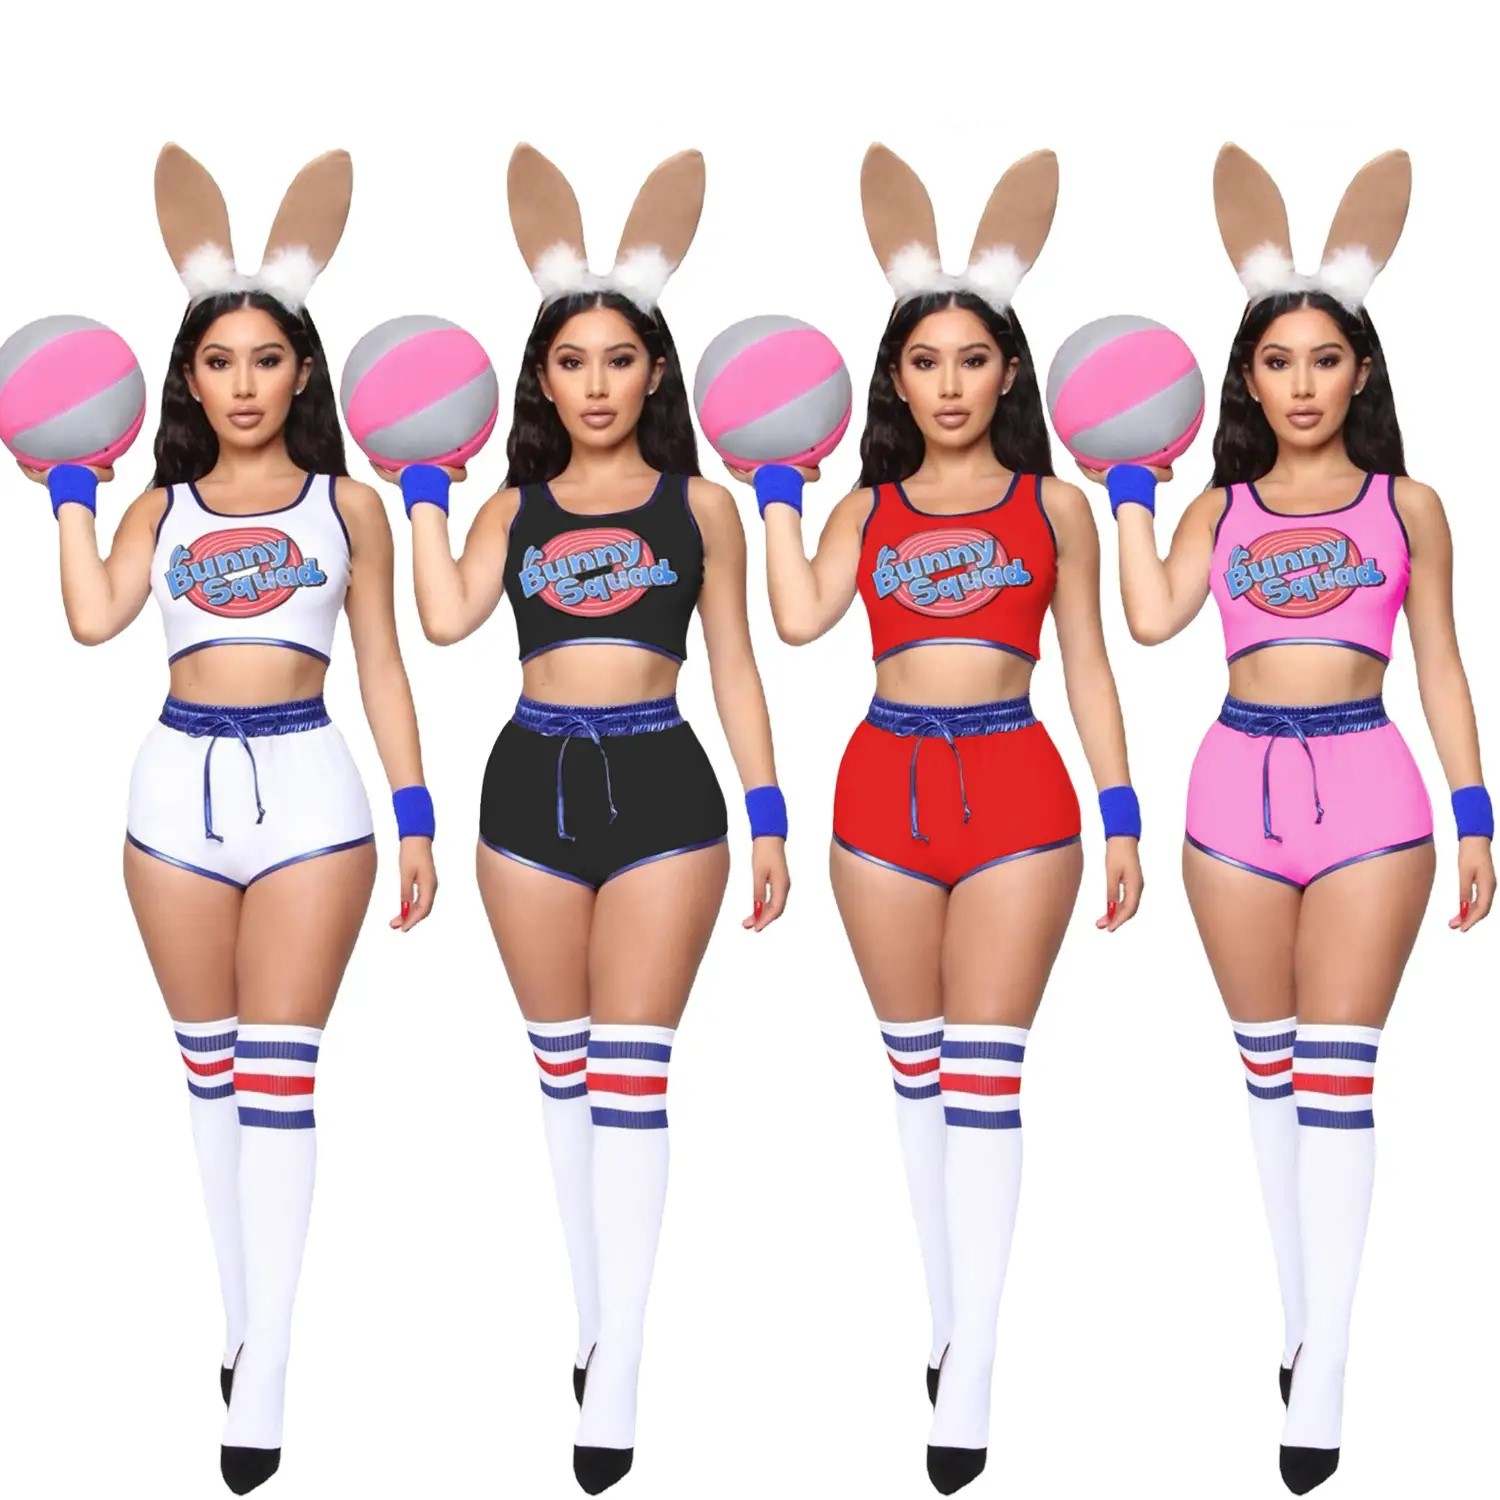 N E W 🐇 Year of the Rabbit themed sports bra + short set now